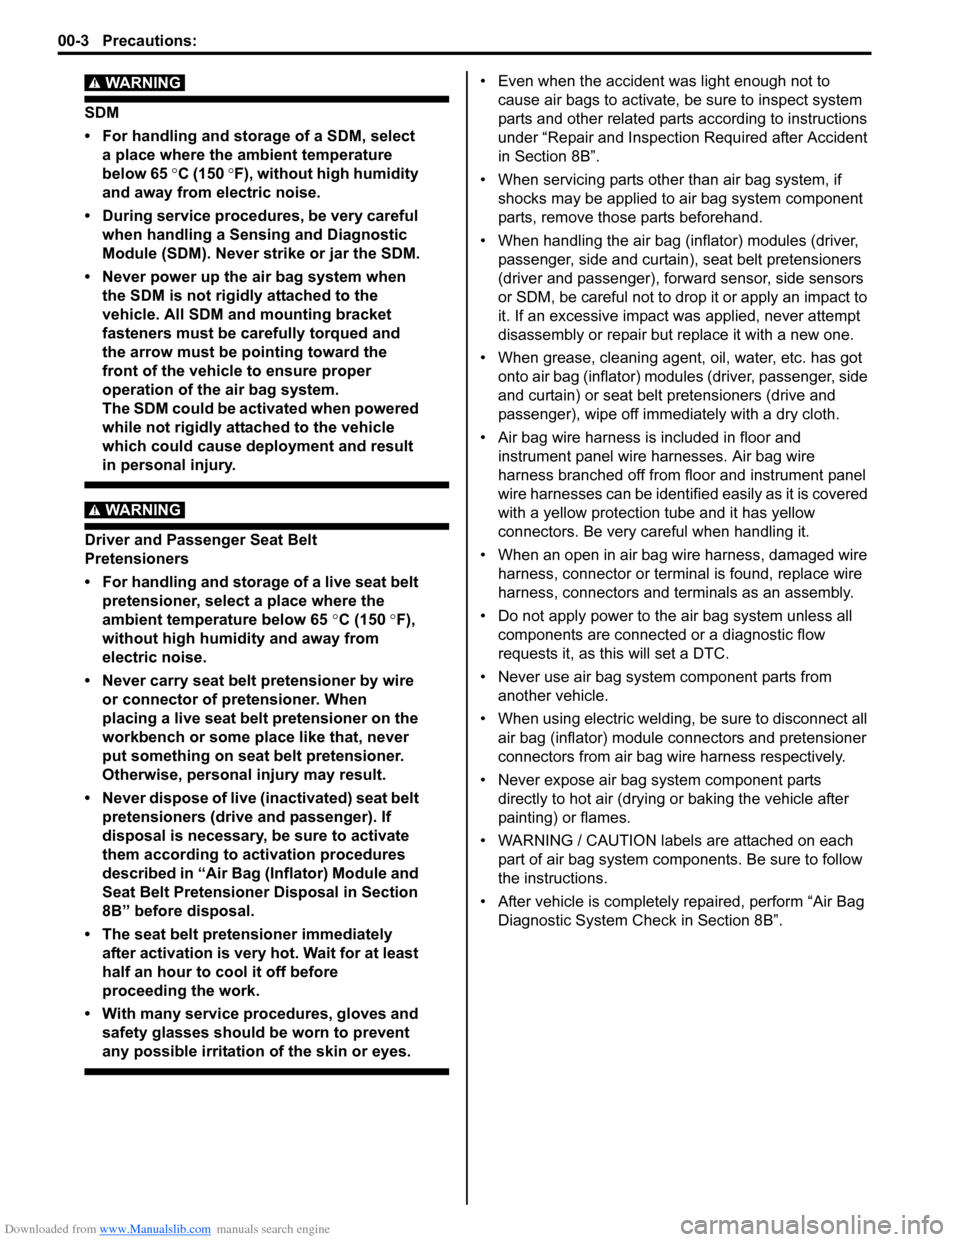 SUZUKI SWIFT 2005 2.G Service Workshop Manual Downloaded from www.Manualslib.com manuals search engine 00-3 Precautions: 
WARNING! 
SDM
• For handling and storage of a SDM, select a place where the ambient temperature 
below 65  °C (150  °F),